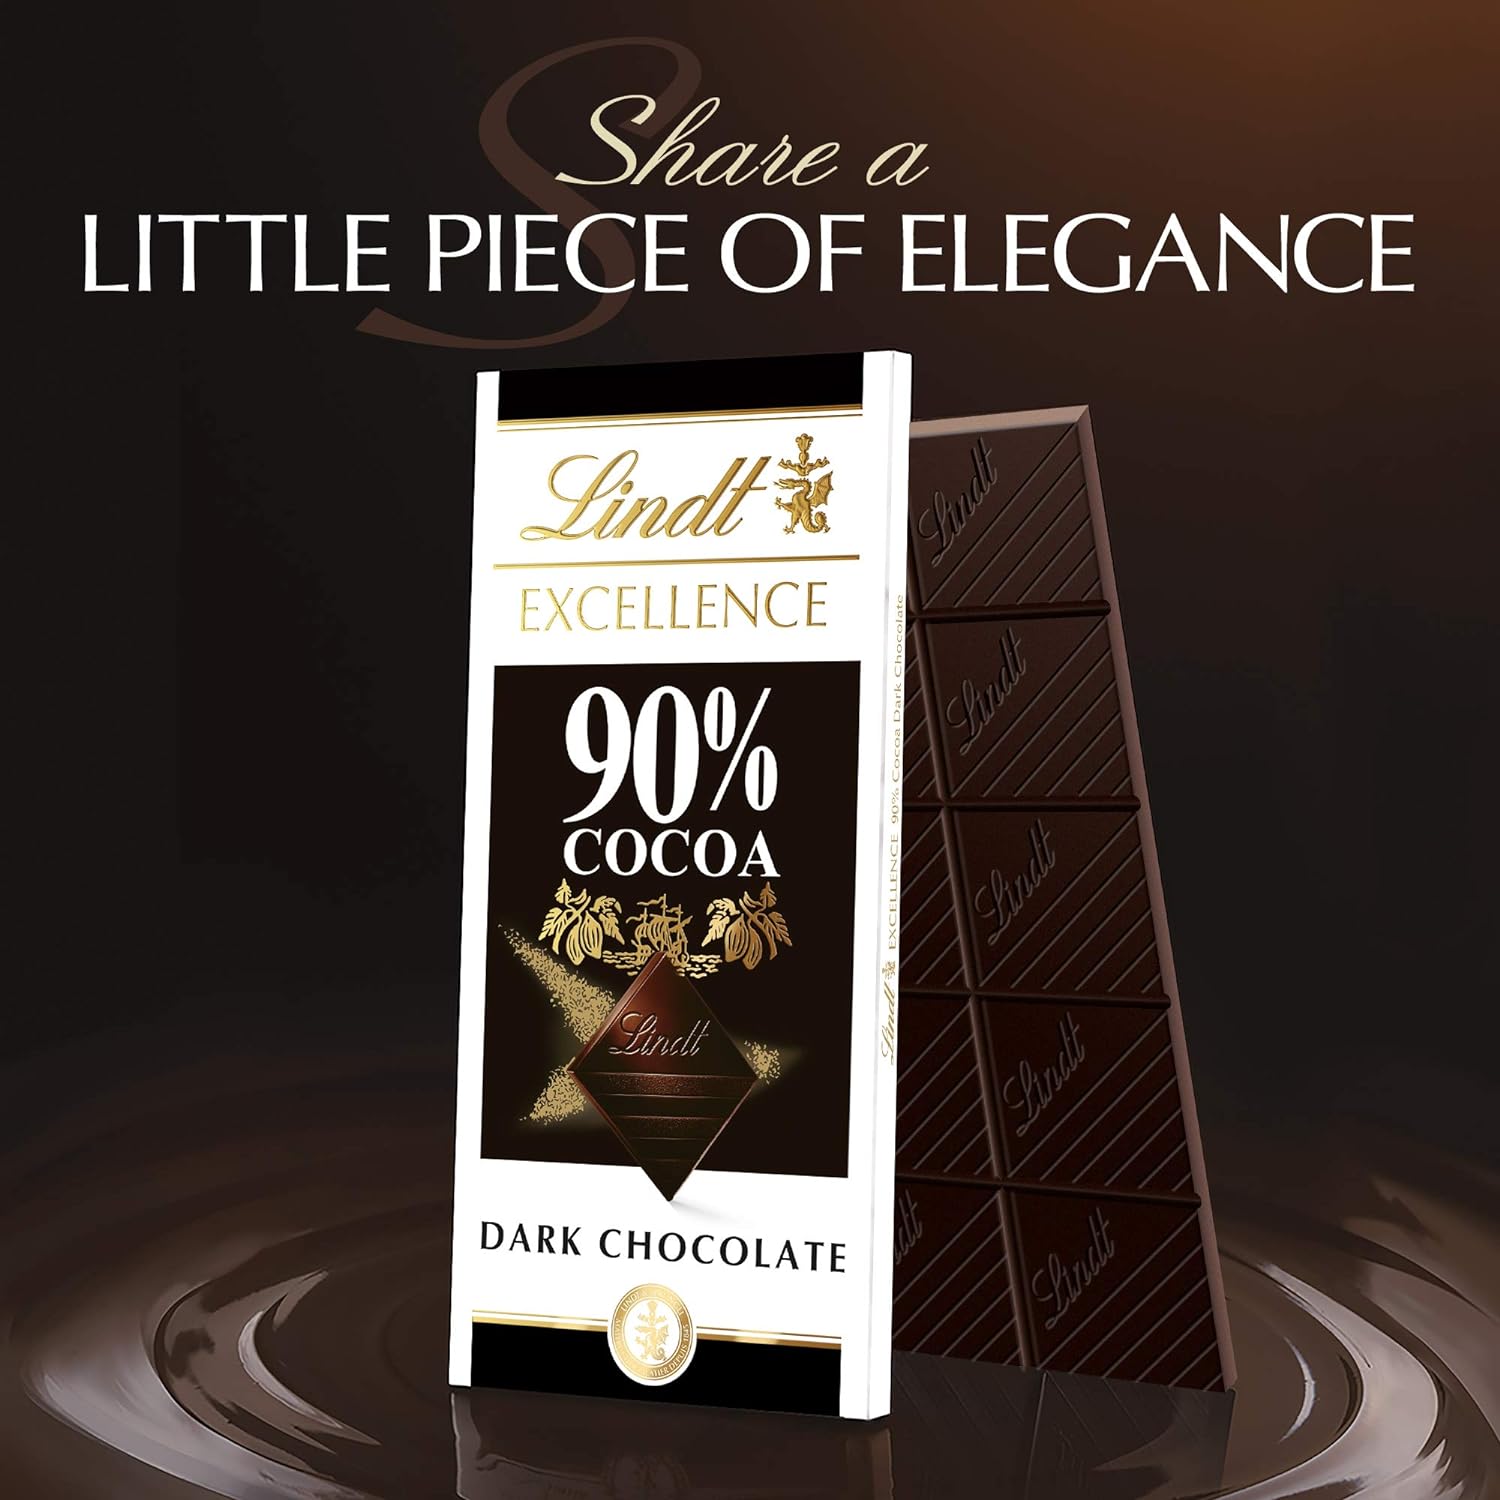  Lindt Excellence Bar, 90% Cocoa Supreme Dark Chocolate, Gluten Free, Great for Holiday Gifting, 3.5 Ounce (Pack of 12)